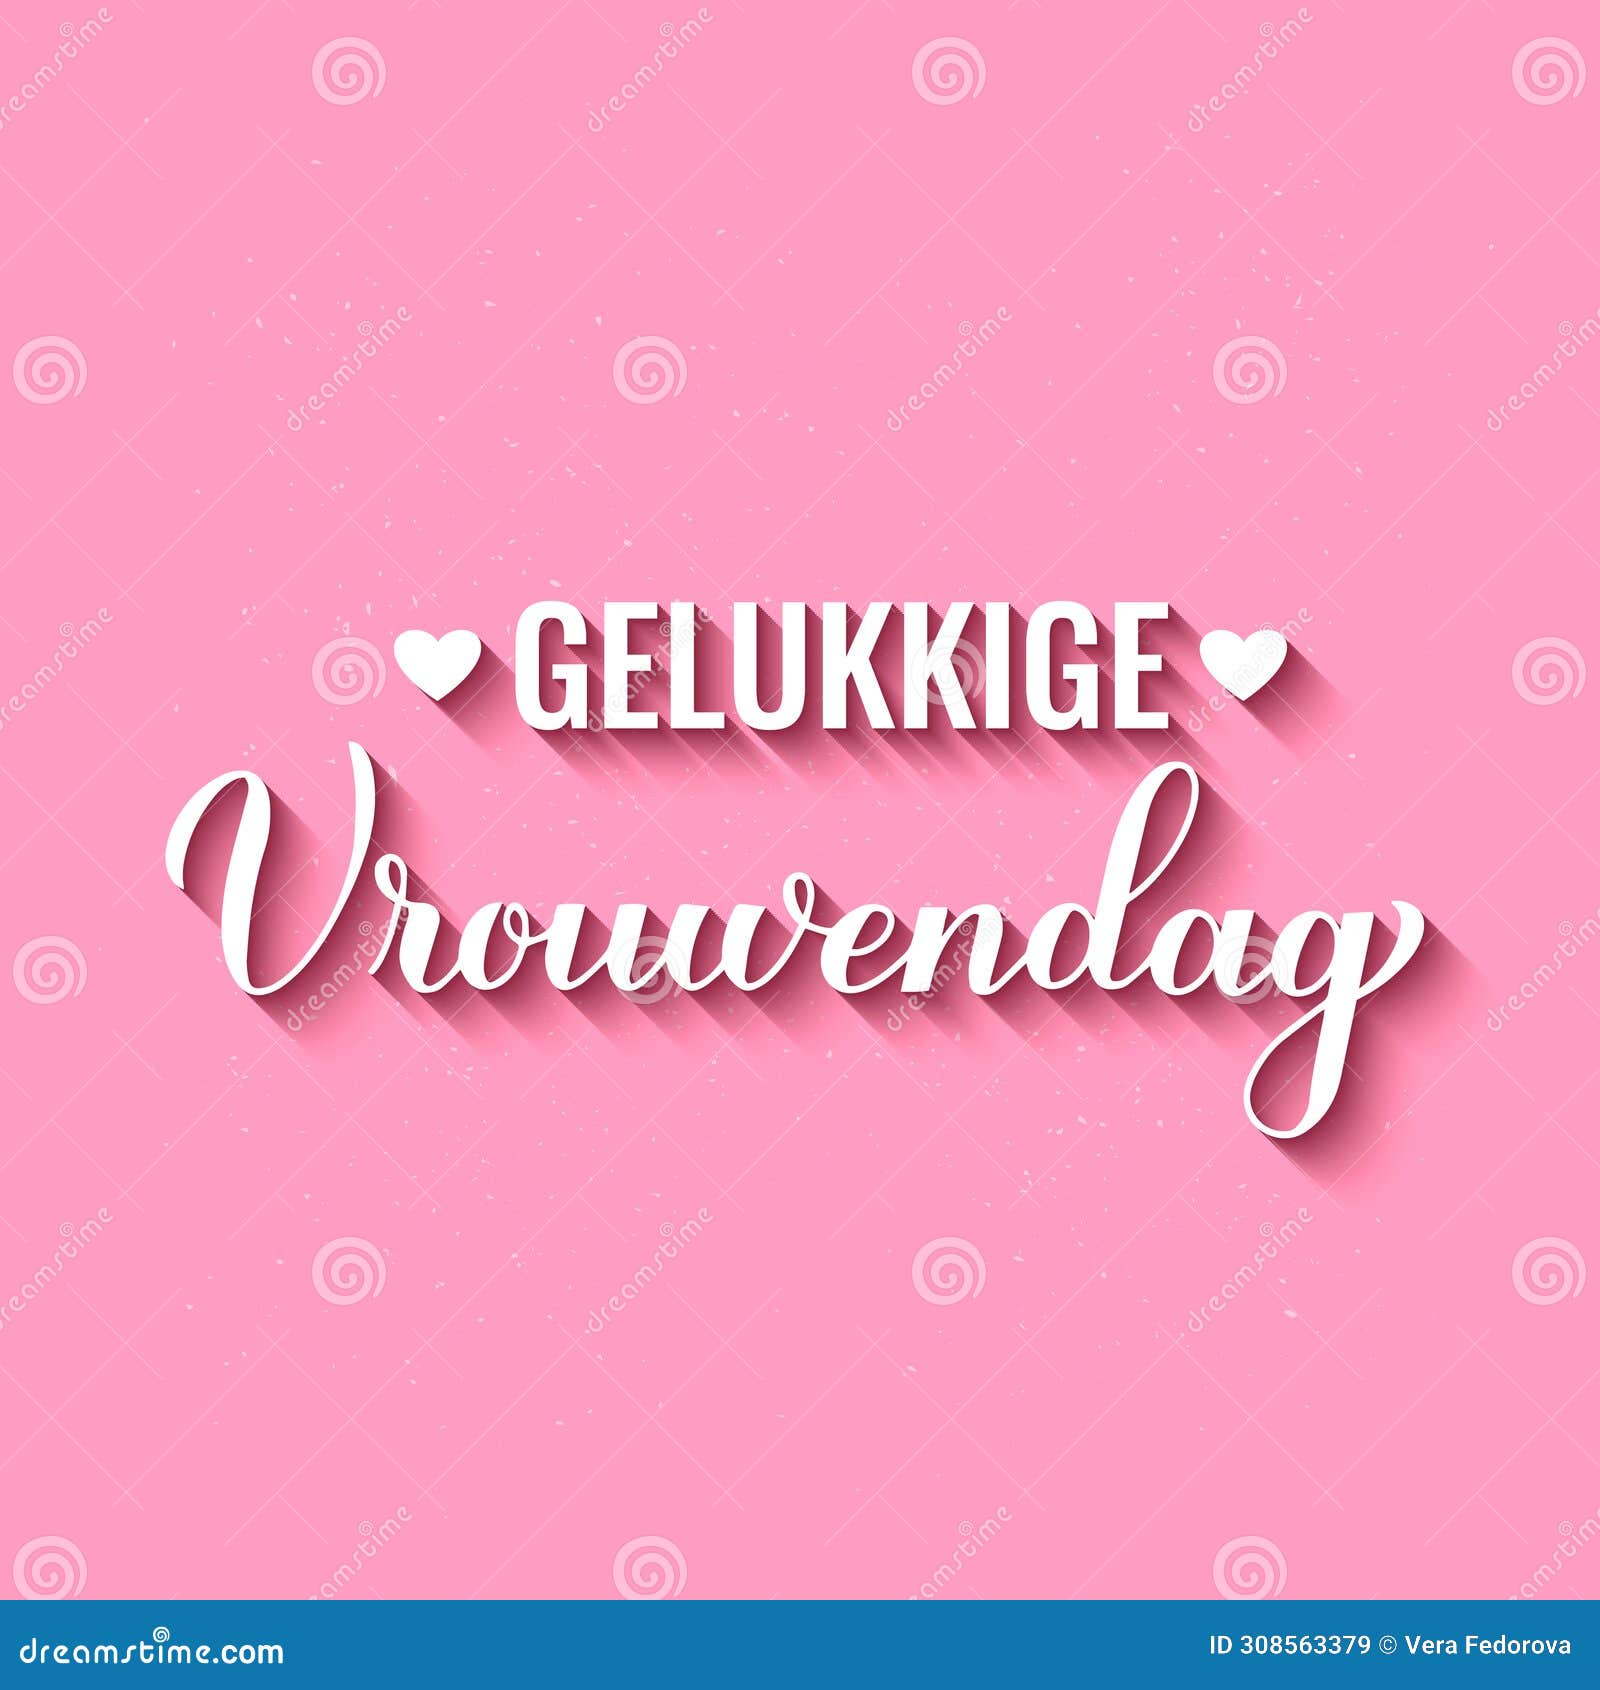 vrouwendag - happy womens day in dutch. calligraphy hand lettering on pink background. international womans day